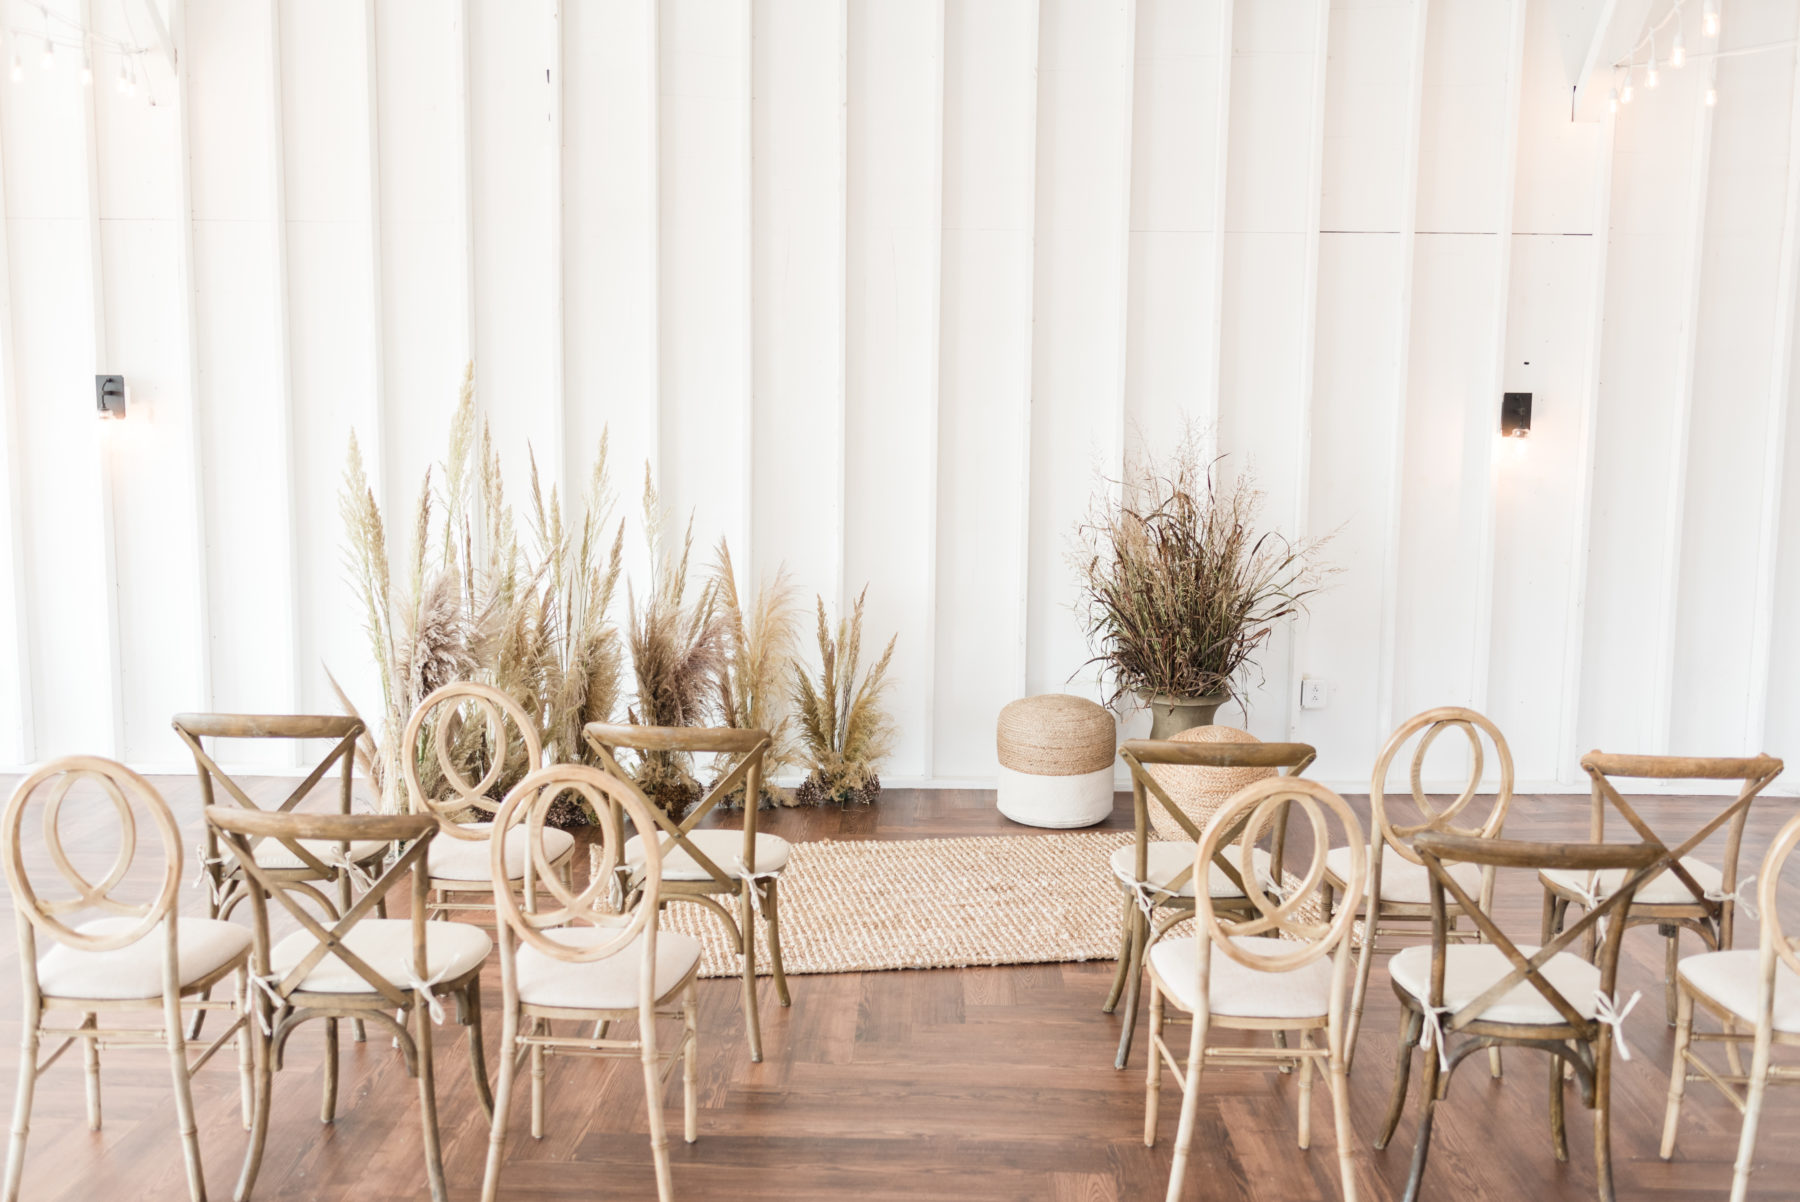 Pampas Grass Wedding Ceremony Decor: Organic Eco-Friendly Wedding Styled Shoot featured on Nashville Bride Guide